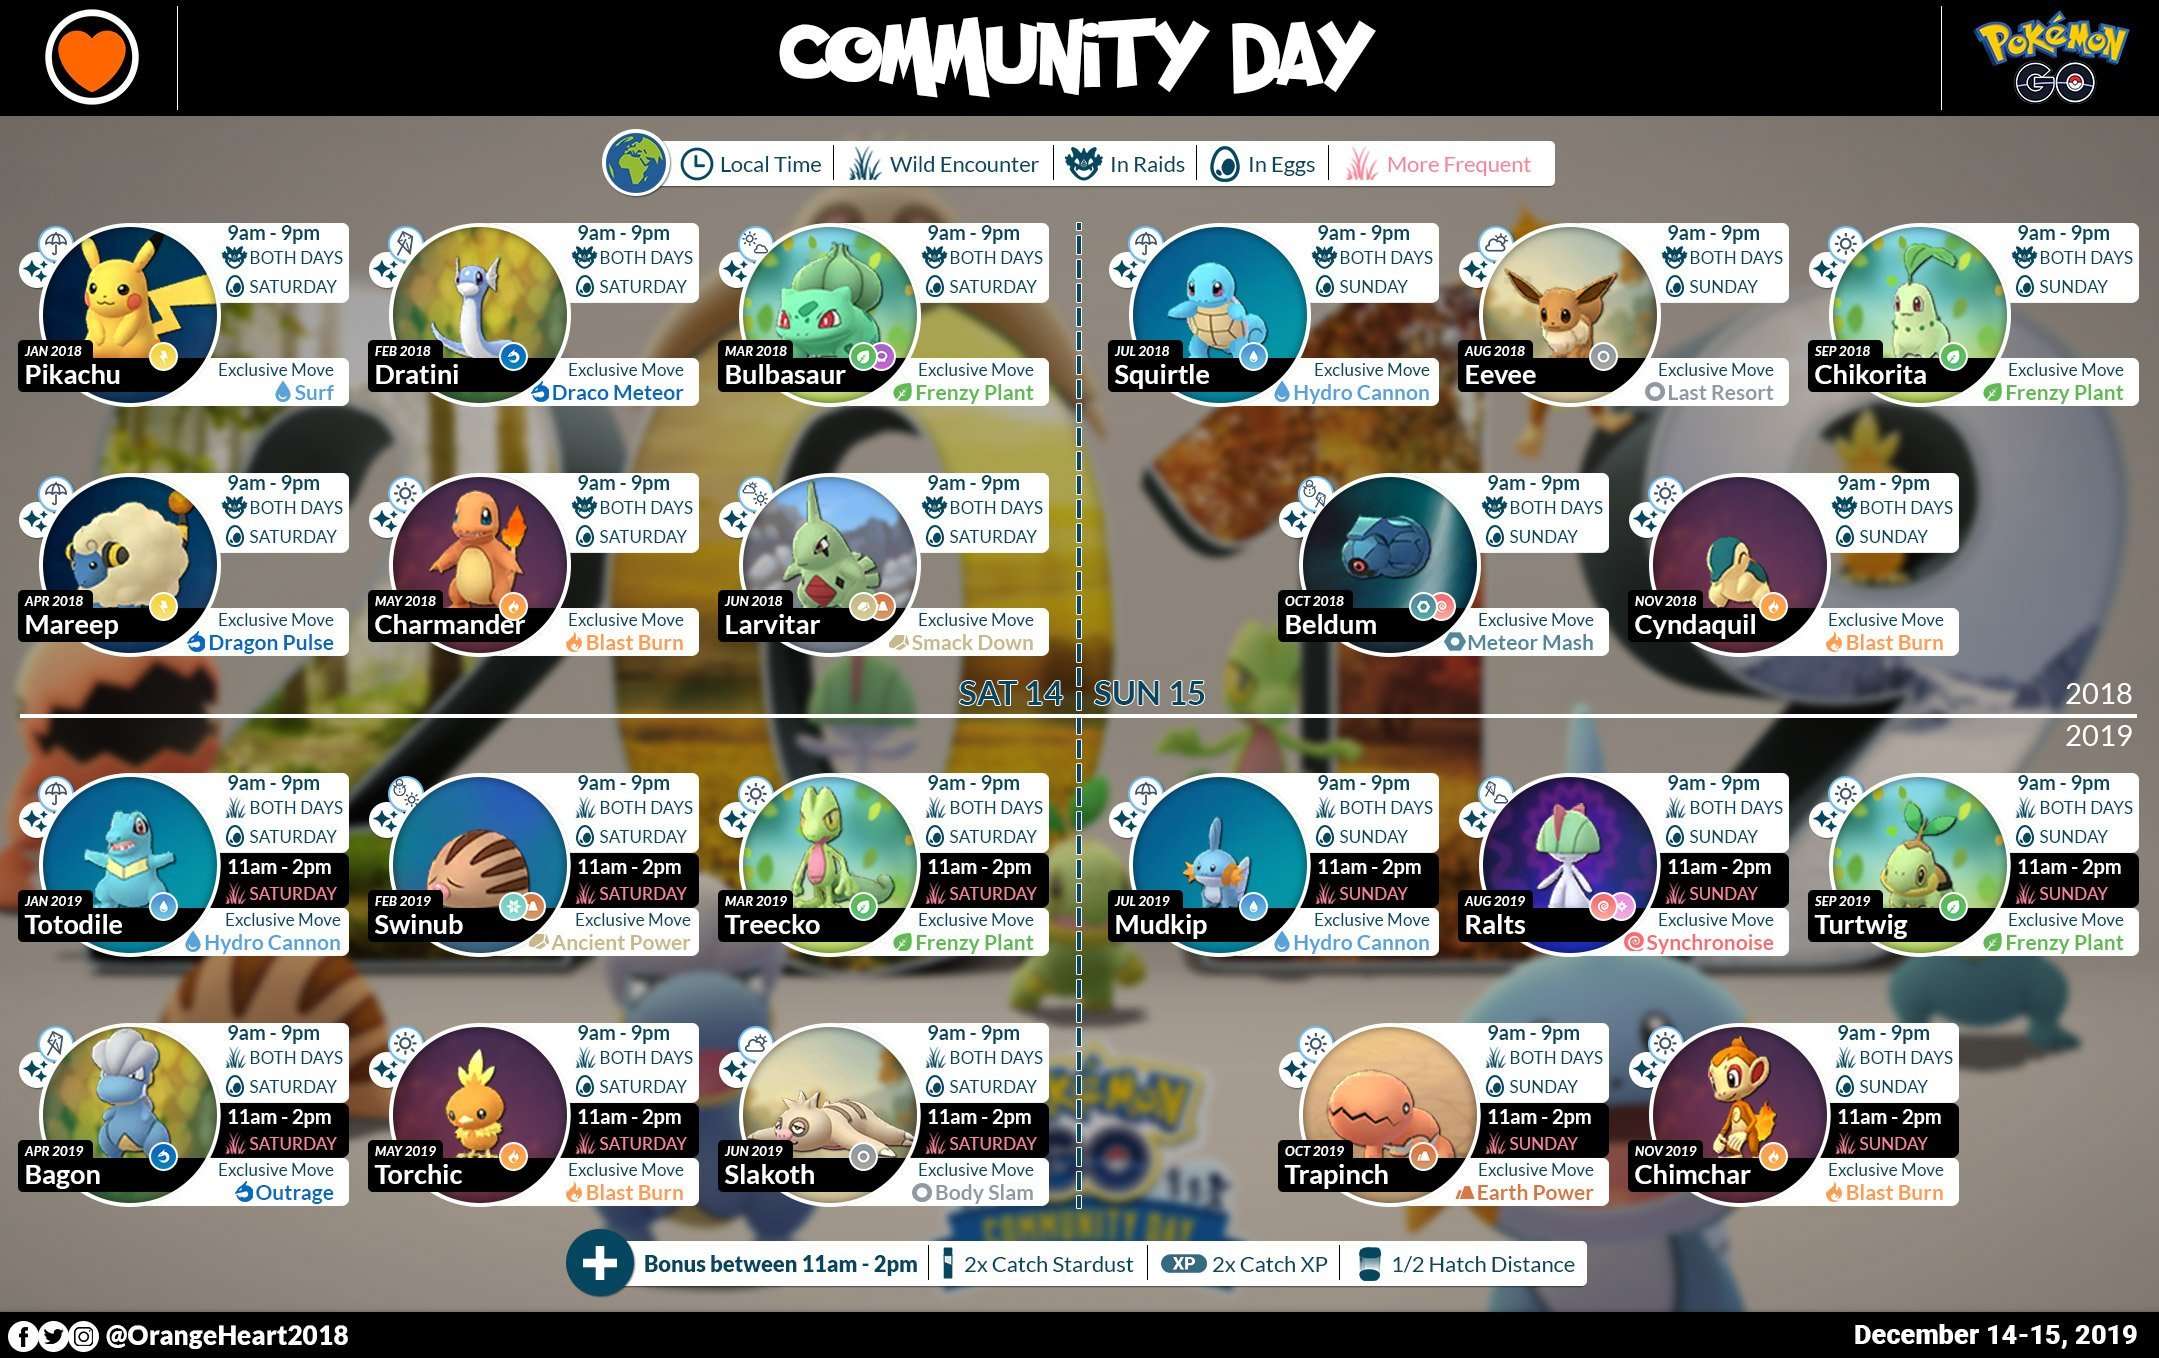 December 2019 Community Day Guide